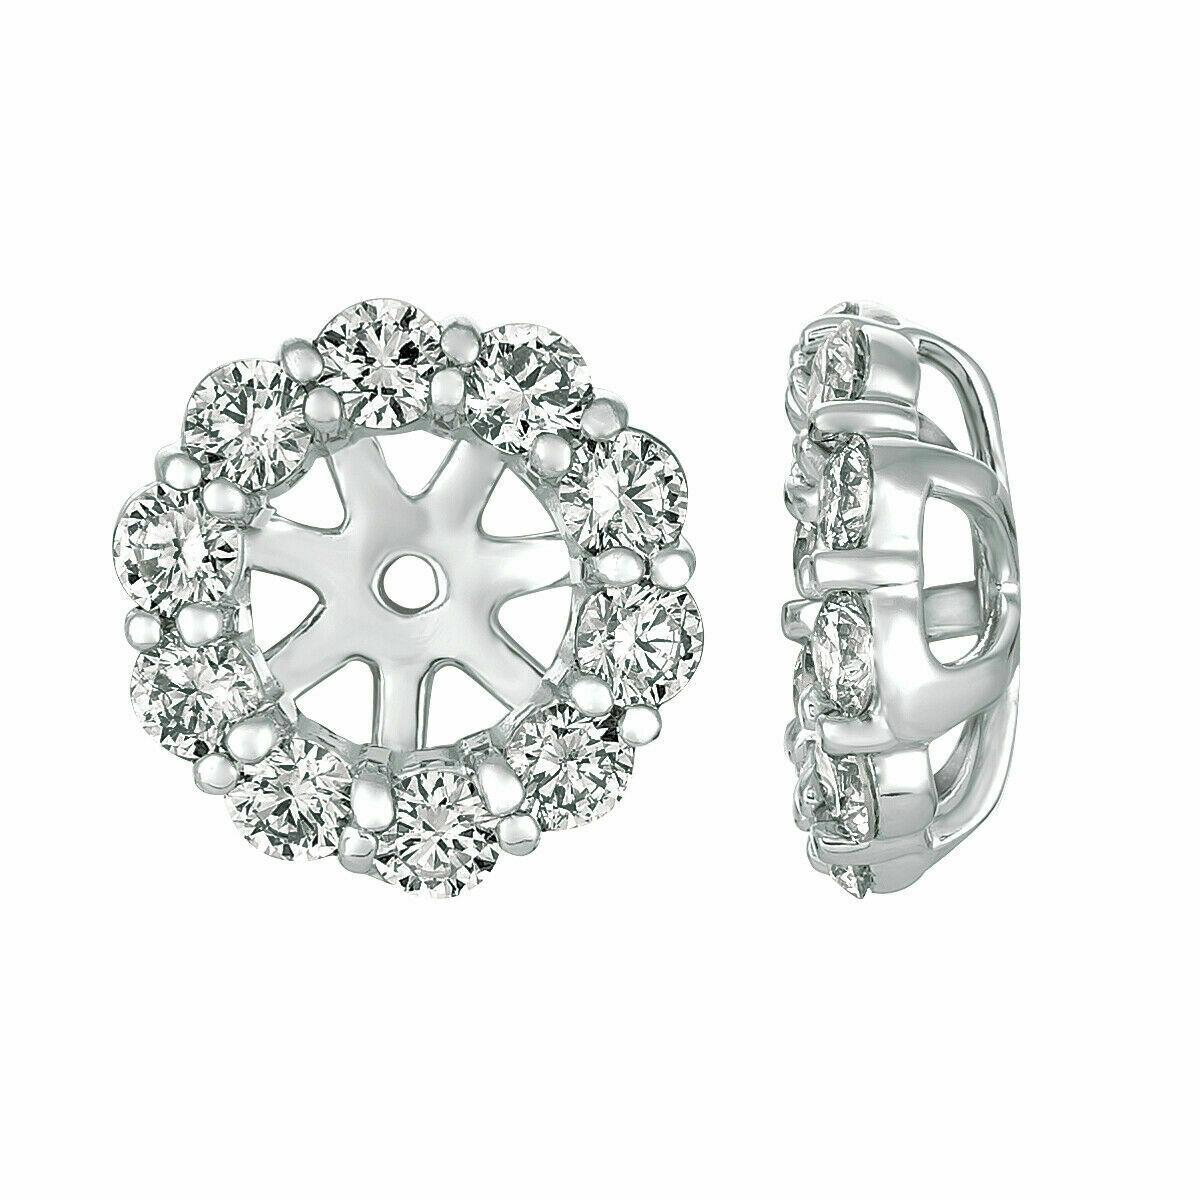 1.26 Ct 7 pointers Natural Diamond Jacket Earrings 14K White Gold center 5 MM

100% Natural, Not Enhanced in any way Round Cut Diamond Earrings
1.26CT
G-H 
SI  
14K White Gold  2.5 gram, prong style 
3/8 inches in height, 3/8 inches in width 